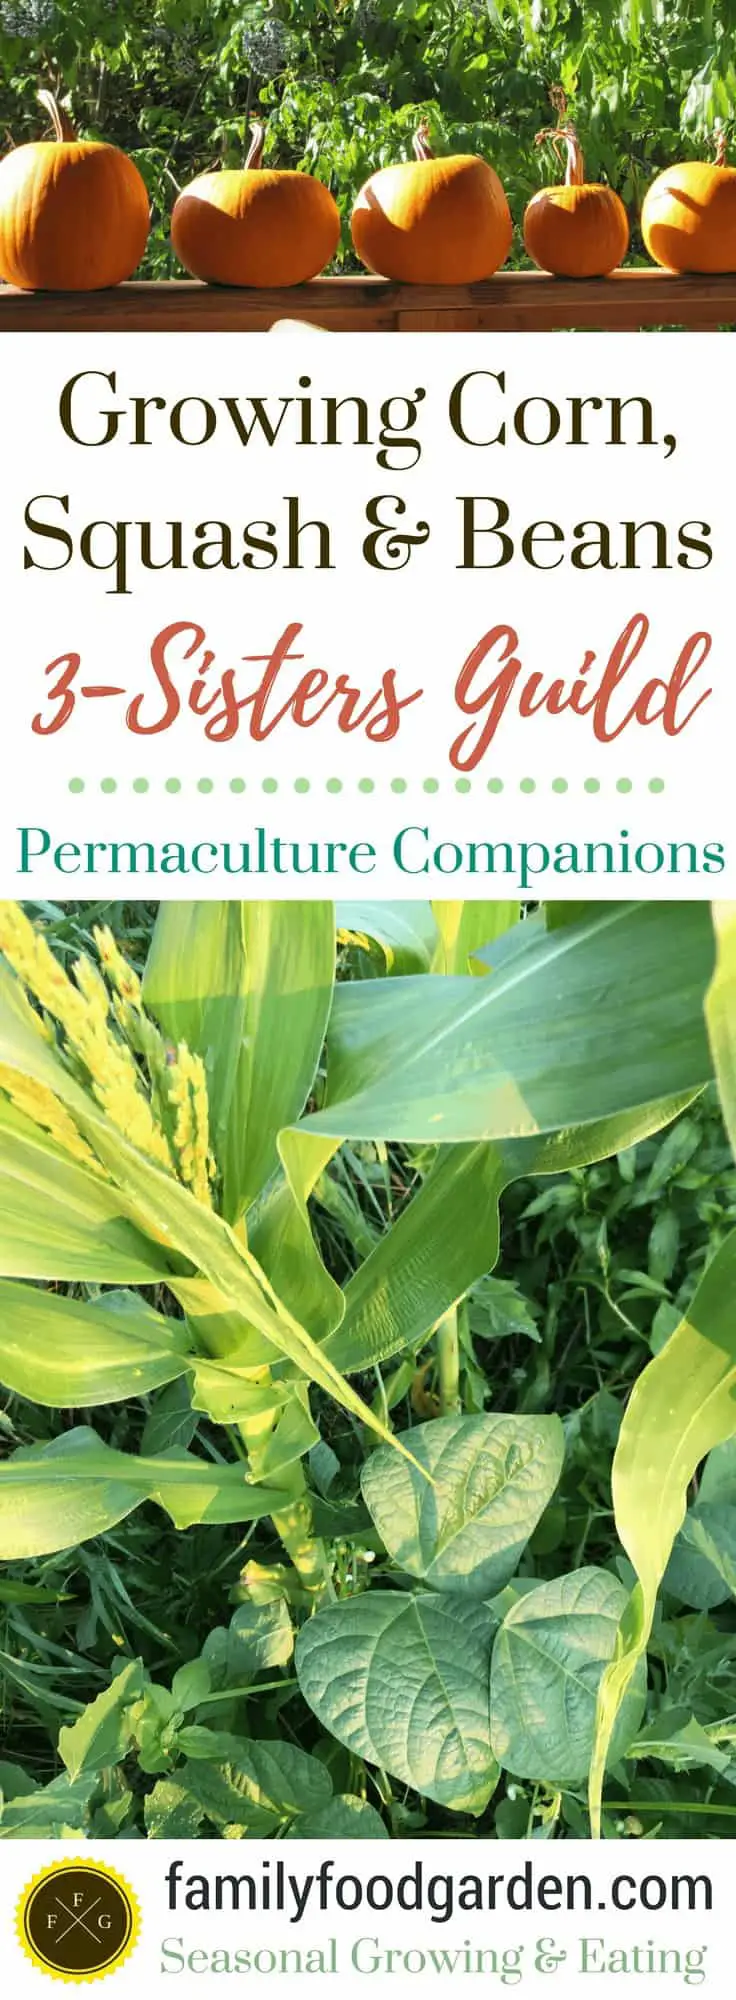 3 Sisters Guild: Growing Corn, Beans & Squash together